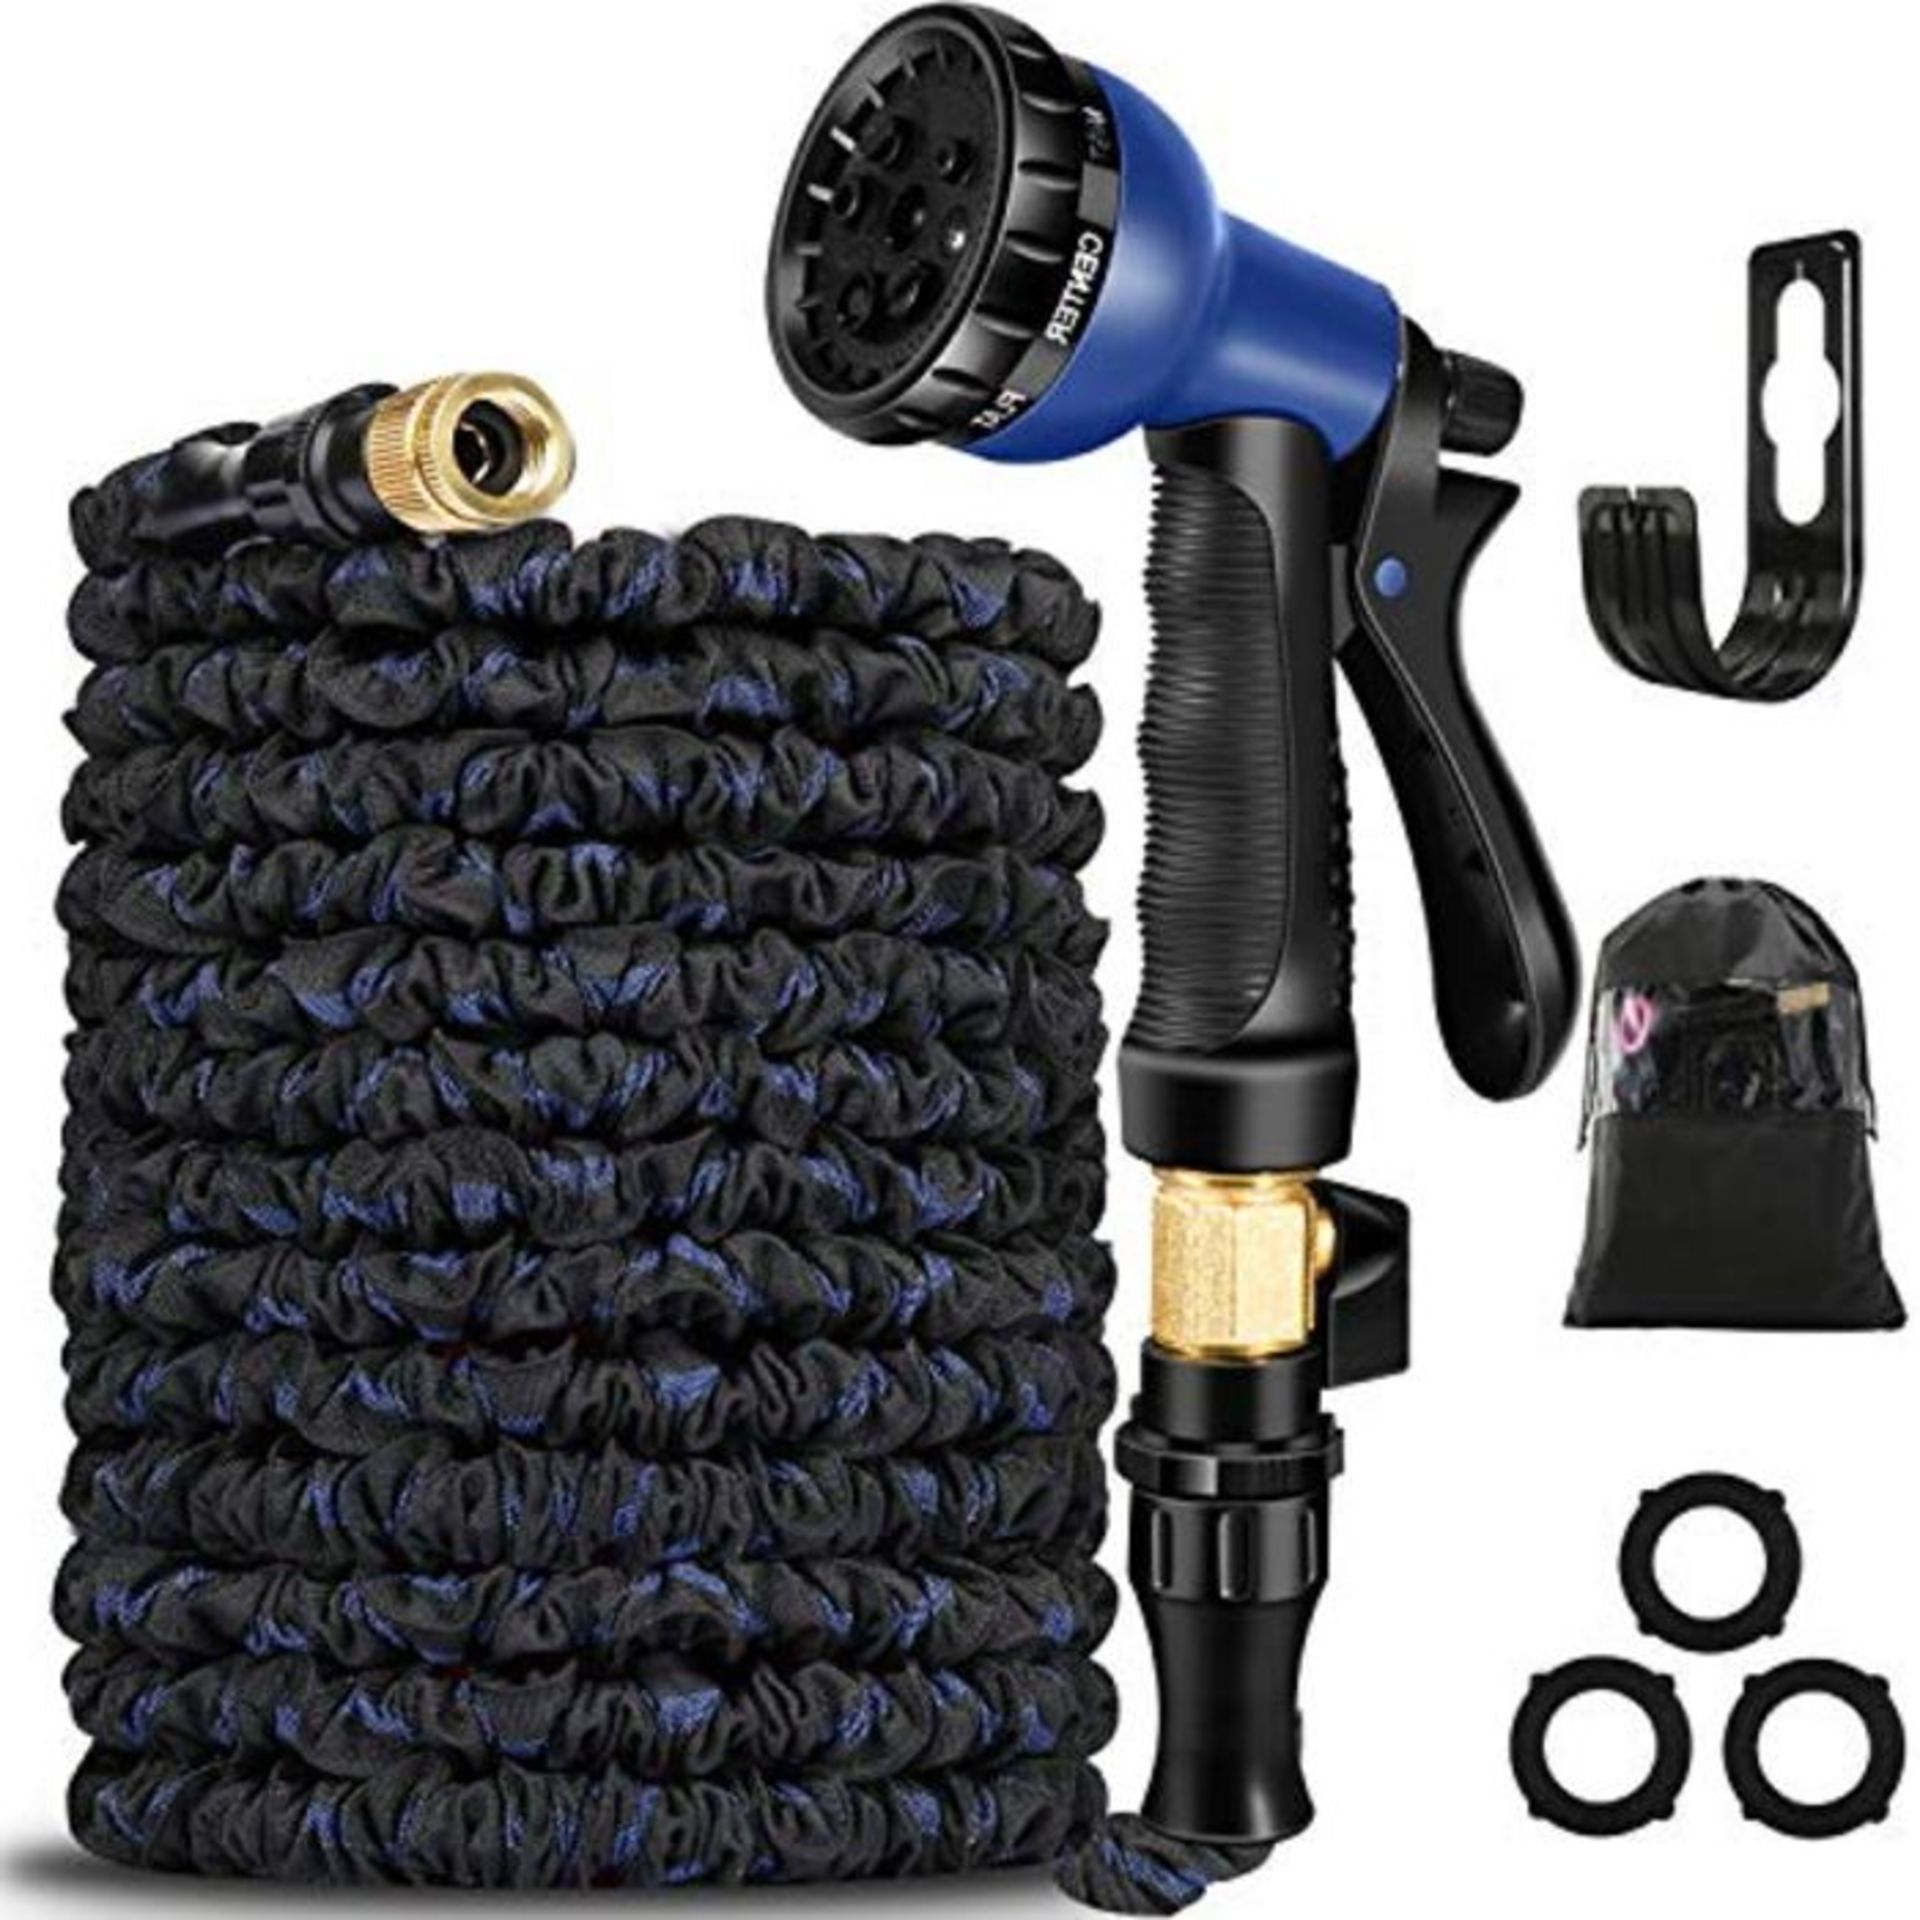 Garden Hose Pipe 100FT, Expanding Flexible Magic Lightweight Watering Hose Pipe with 8